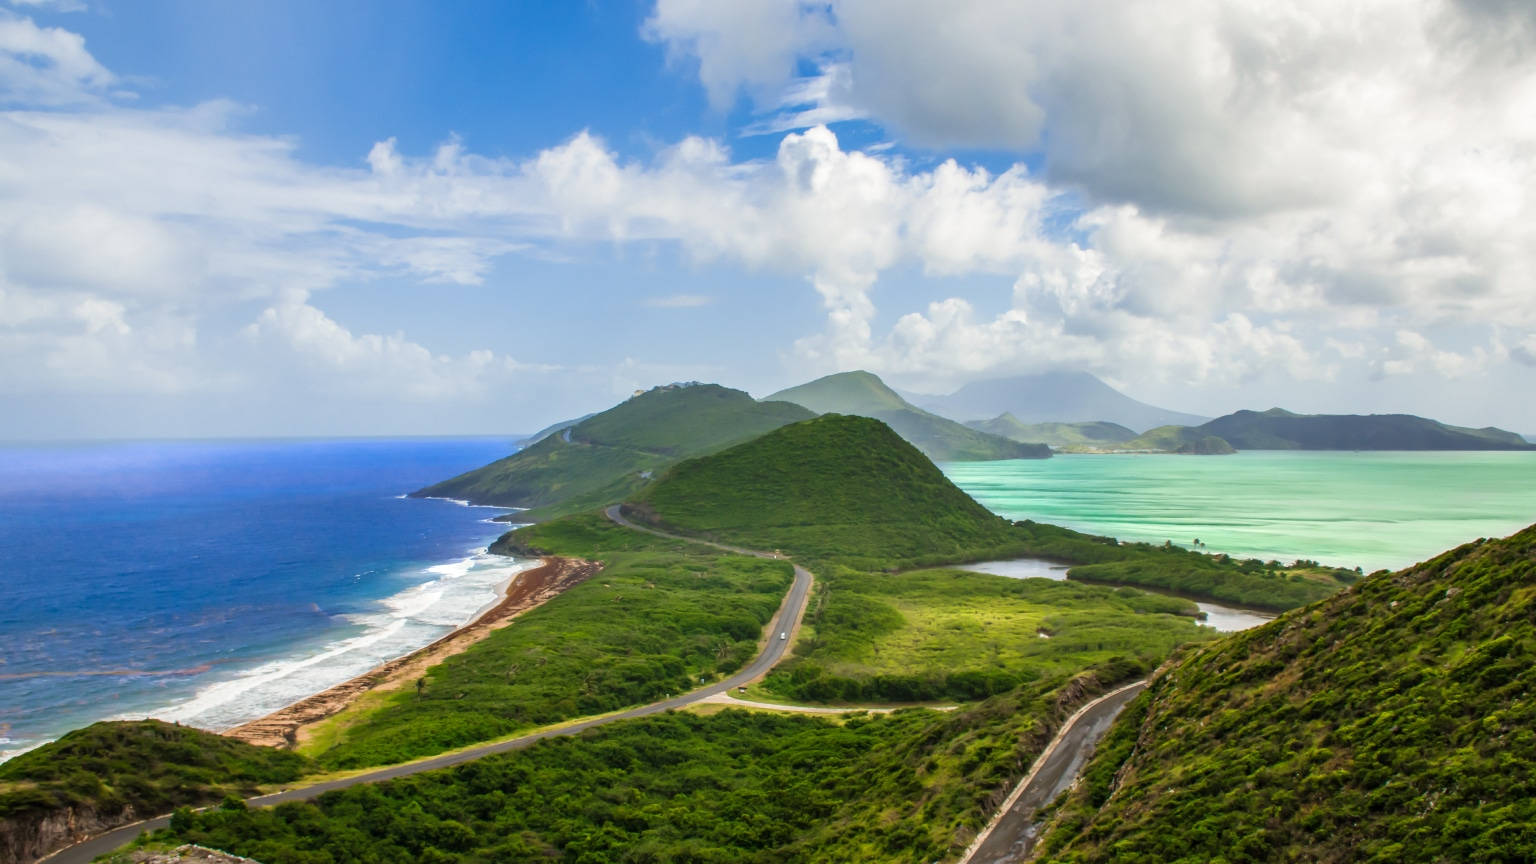 St Kitts And Nevis Ocean View Wallpaper